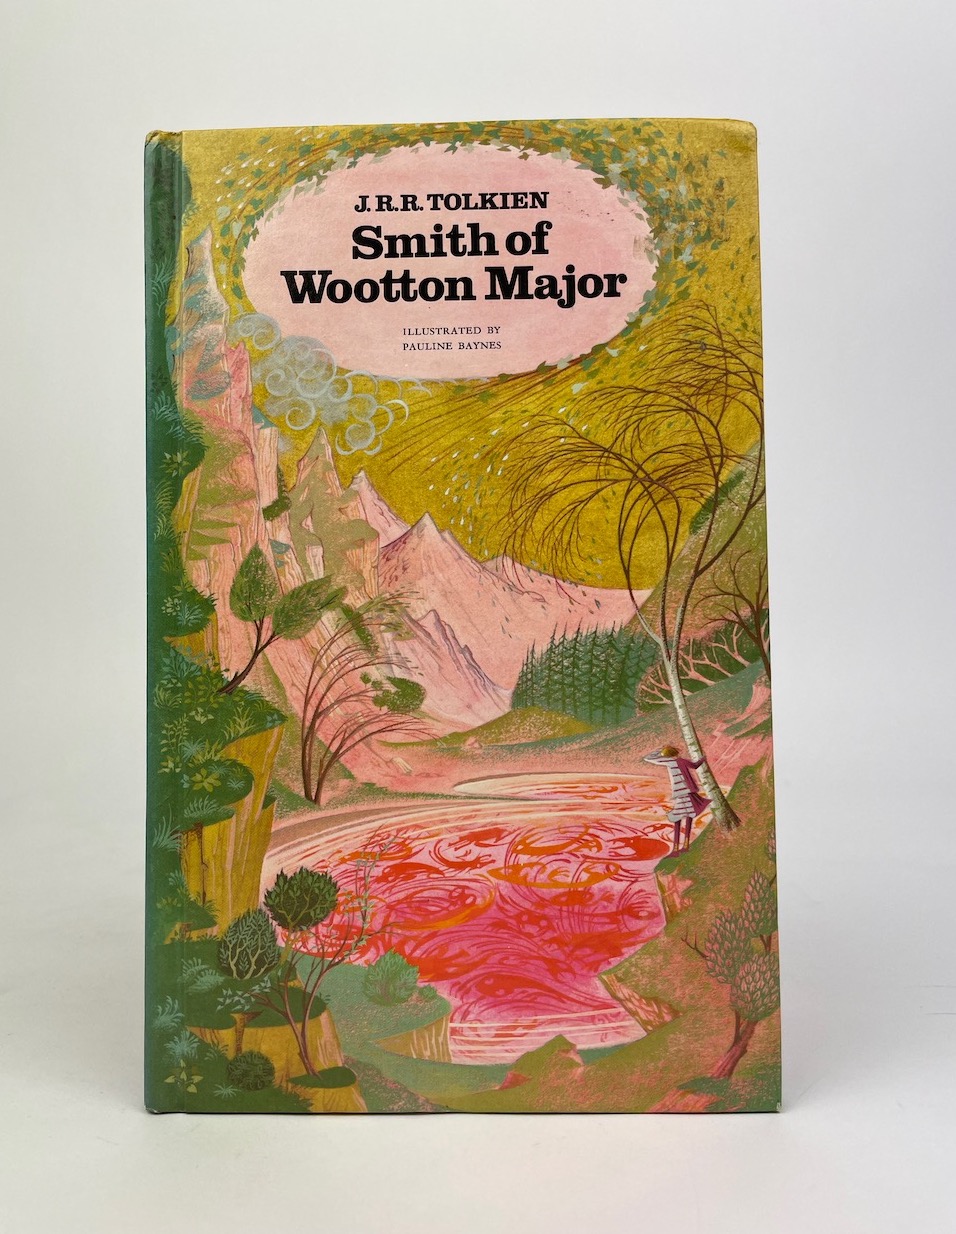 1975 Smith of Wootton Major by J.R.R. Tolkien – Houghton Mifflin 2nd Impression 1